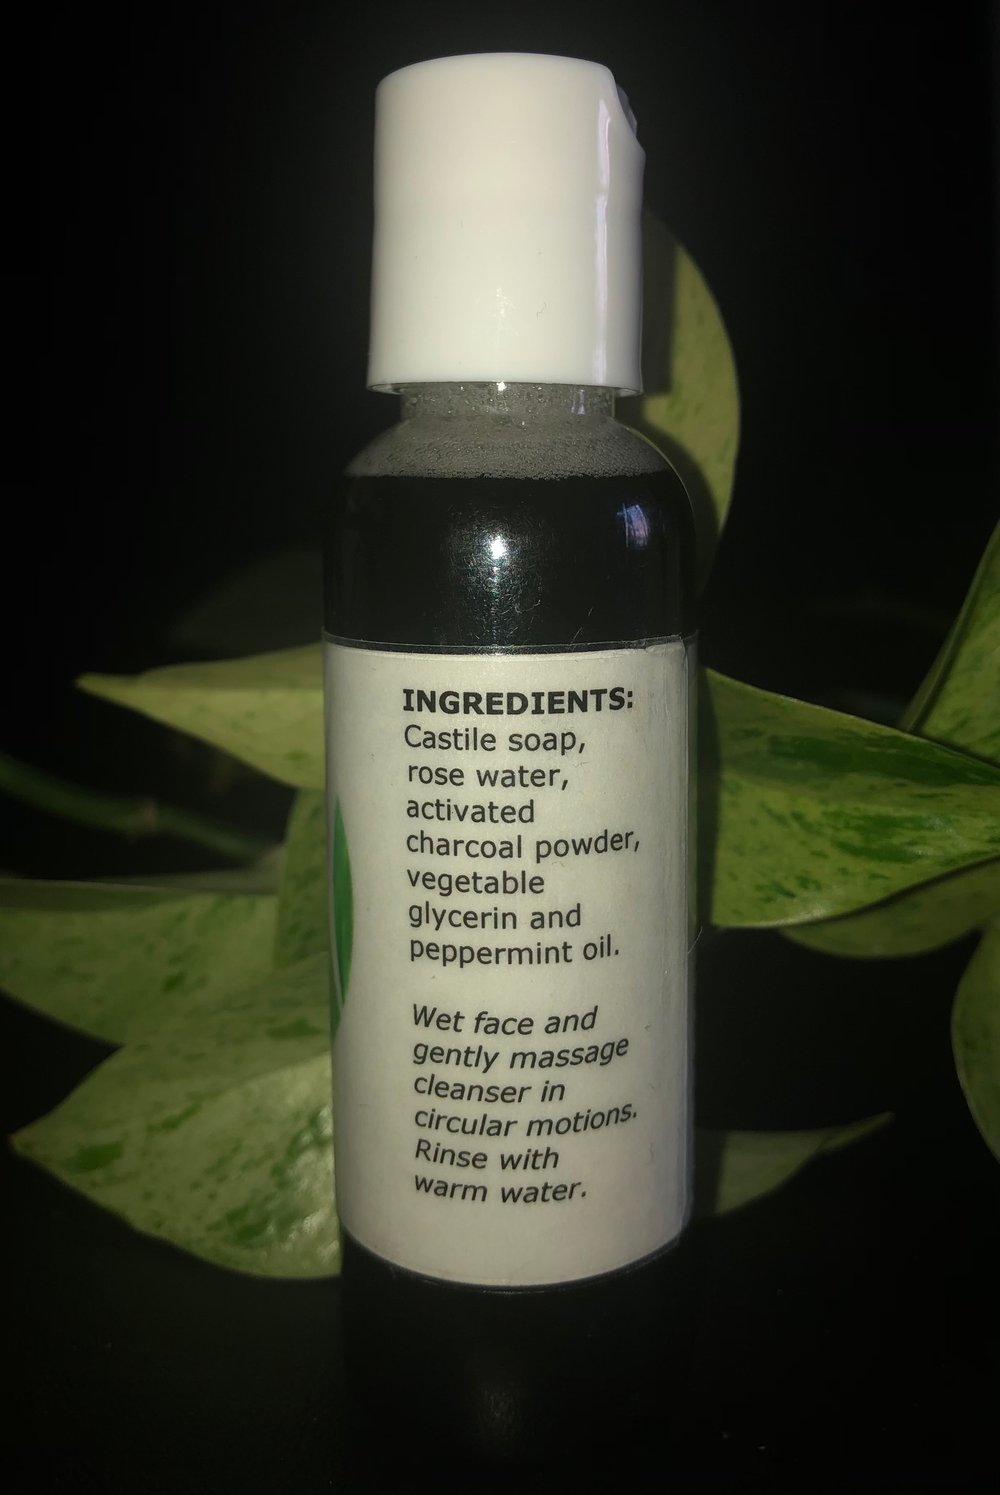 Charcoal cleanser